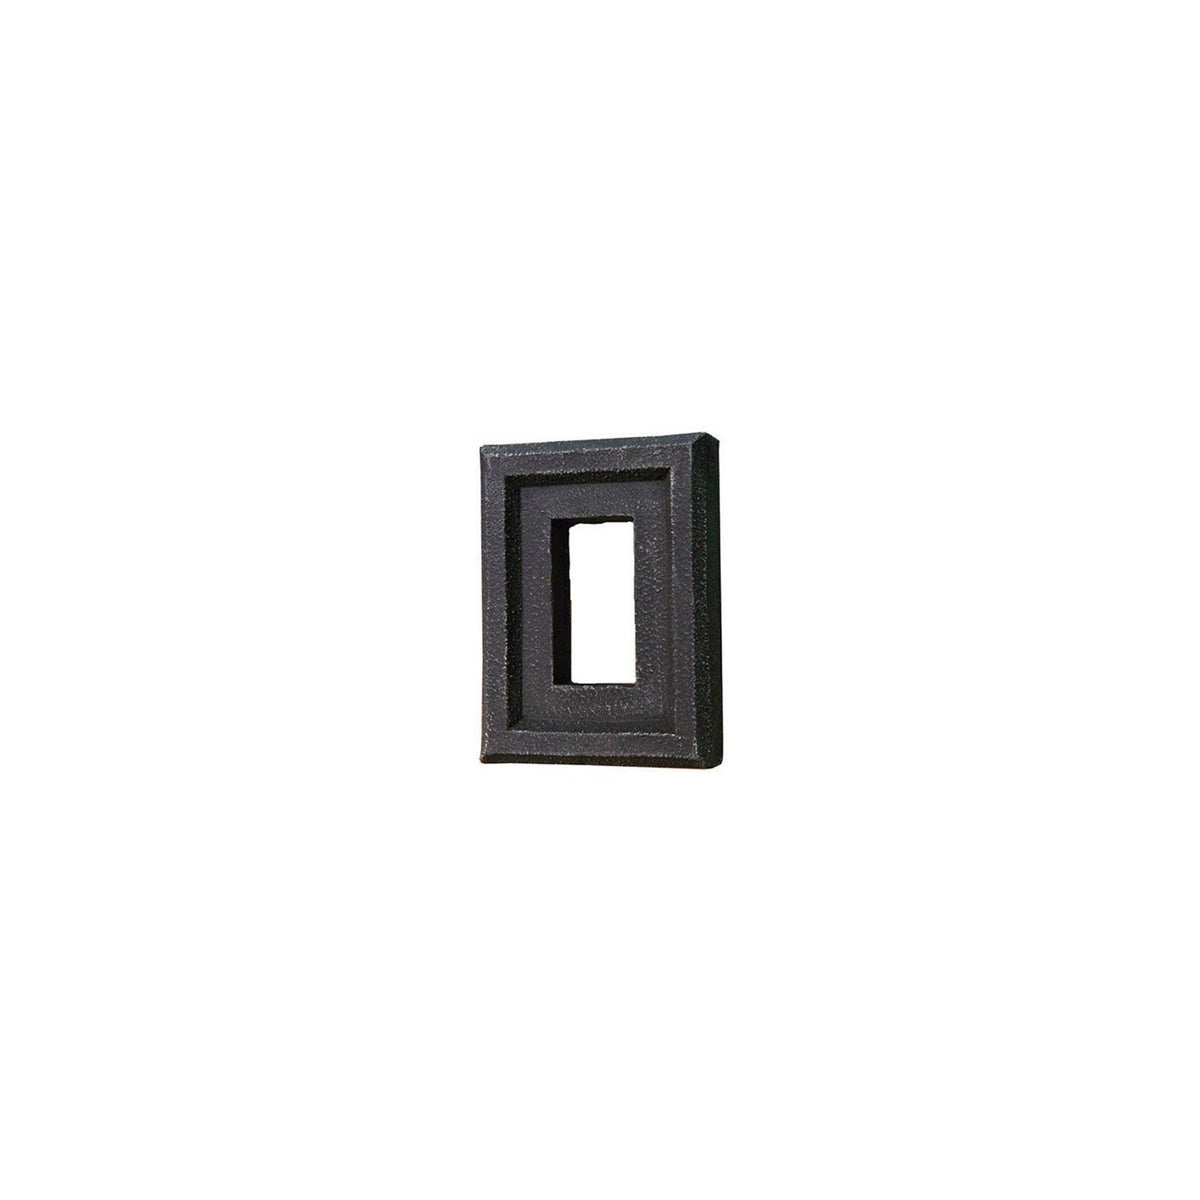 Quality Stone - Black - Electrical Trim-Faux Stone Accessories-Quality Stone-Black Blend-Wall Theory